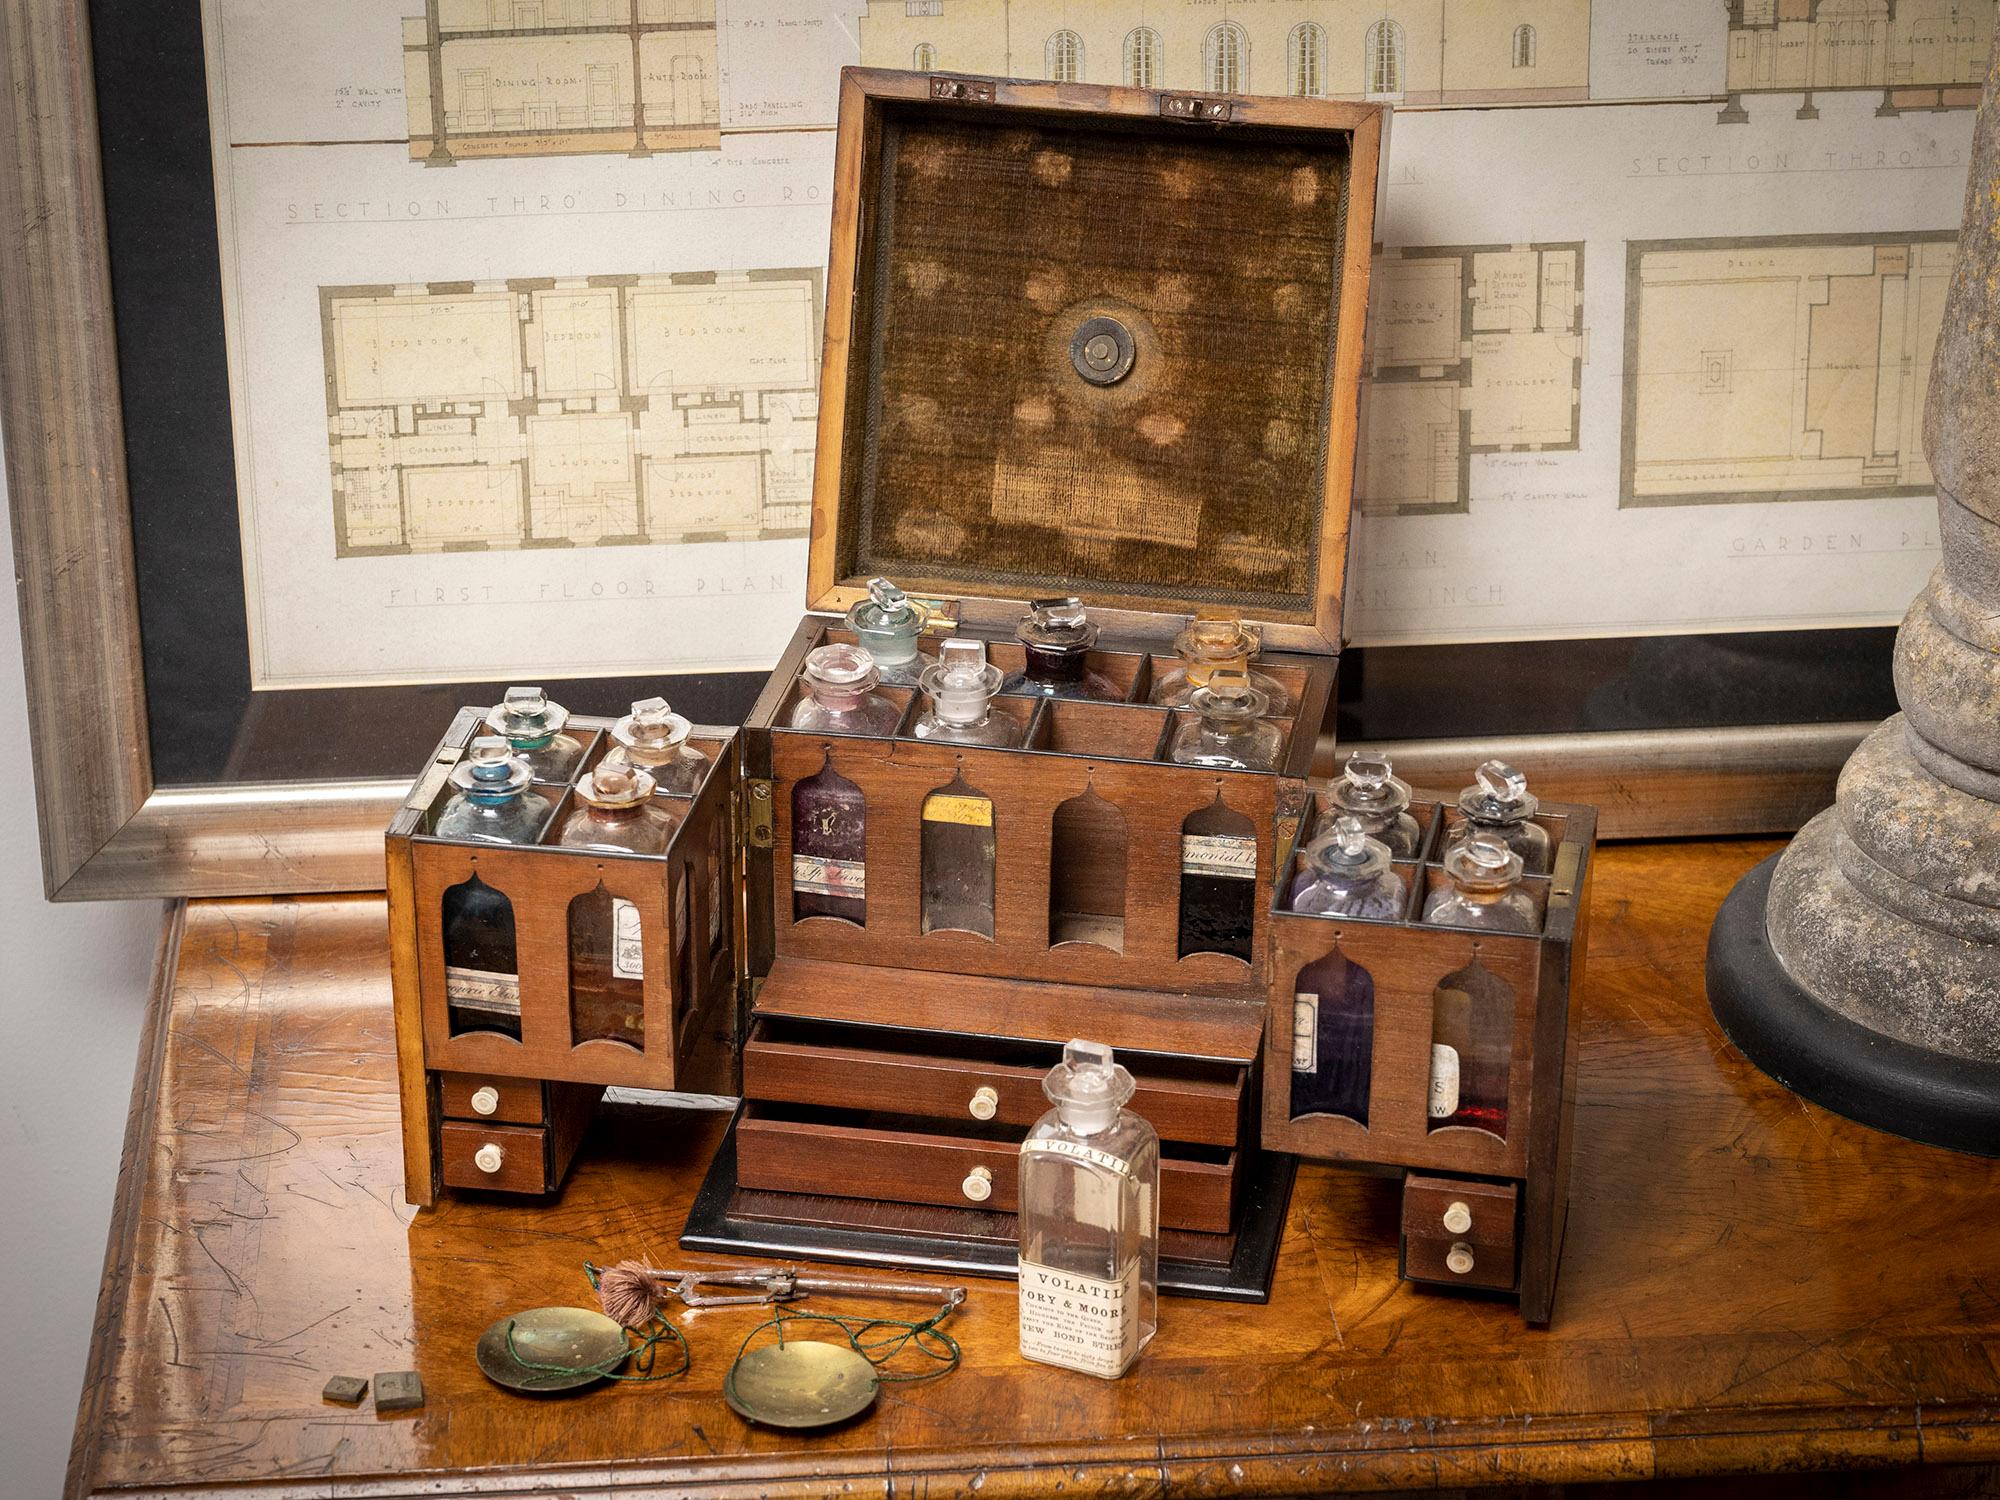 Complete with fifteen Glass Bottles

From our Apothecary collection, we are delighted to offer this Satinwood Apothecary Box. The Apothecary Box of square form veneered in Satinwood with fine Kingwood crossbanding and Boxwood edging finished with